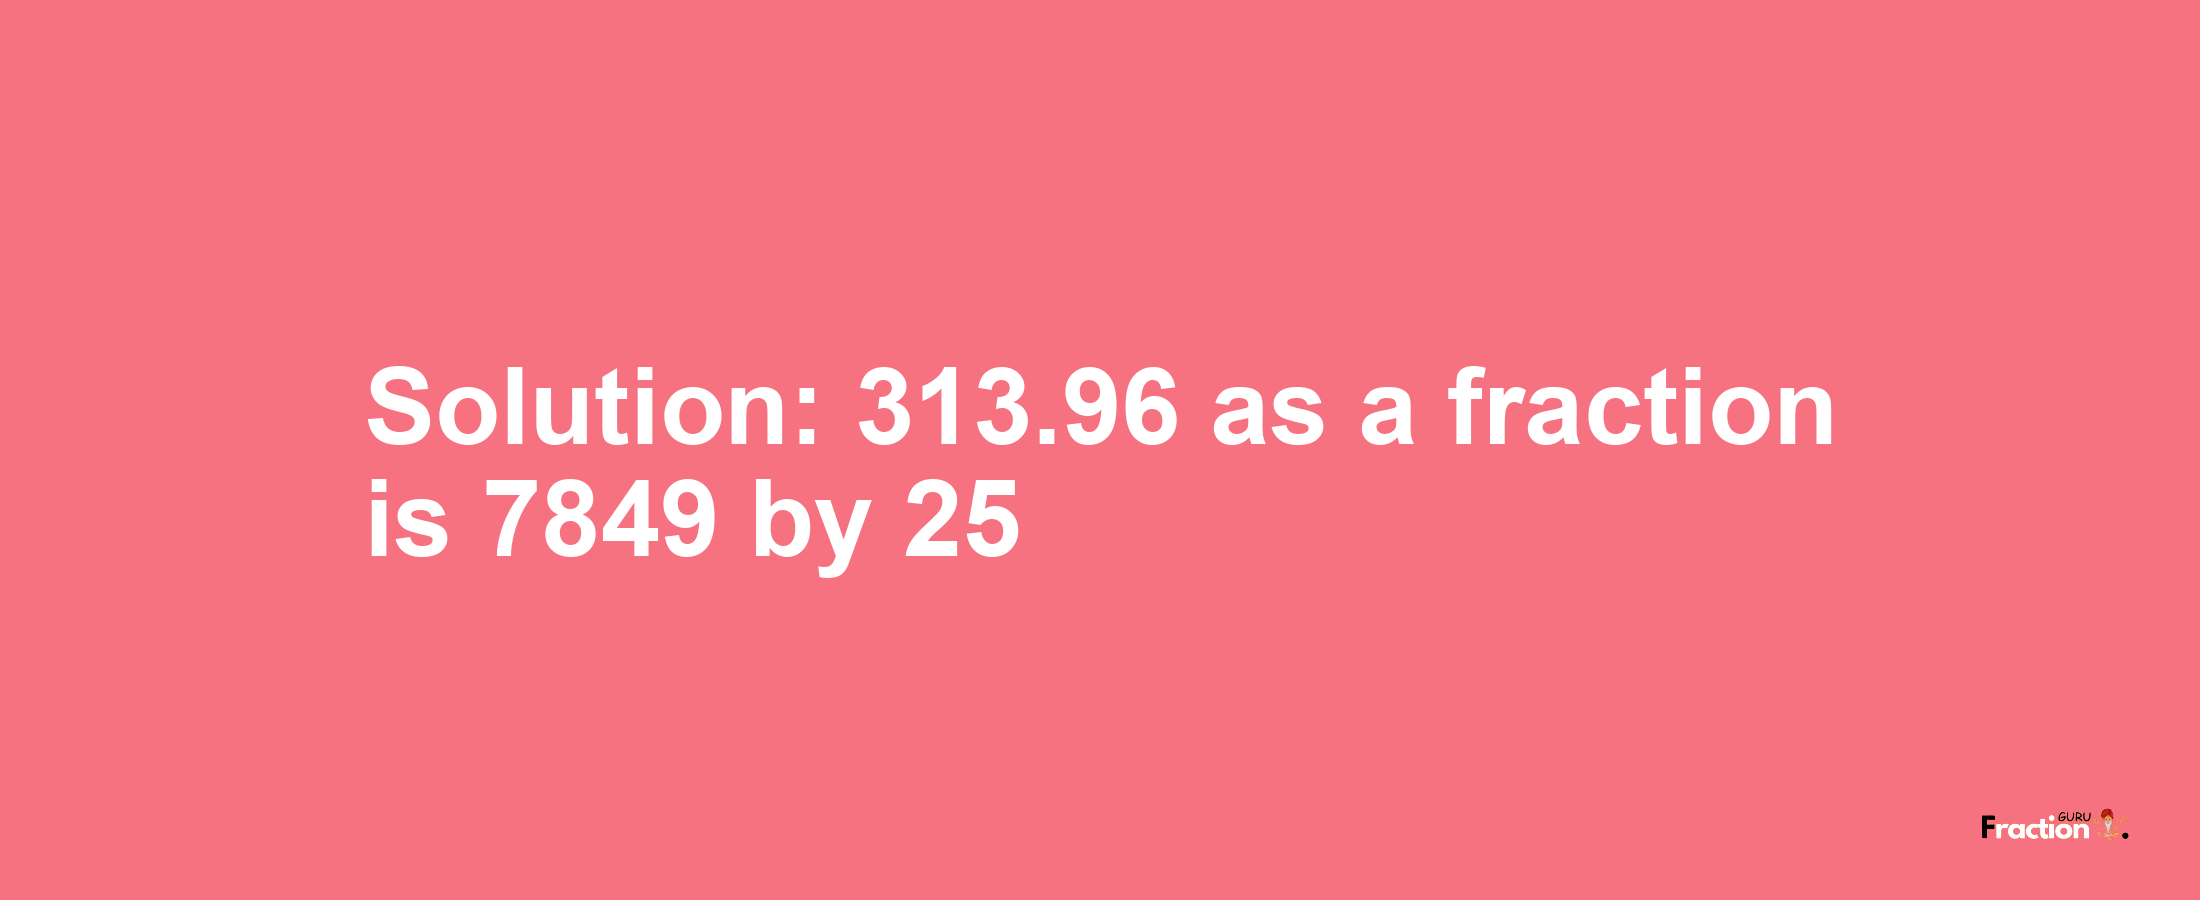 Solution:313.96 as a fraction is 7849/25